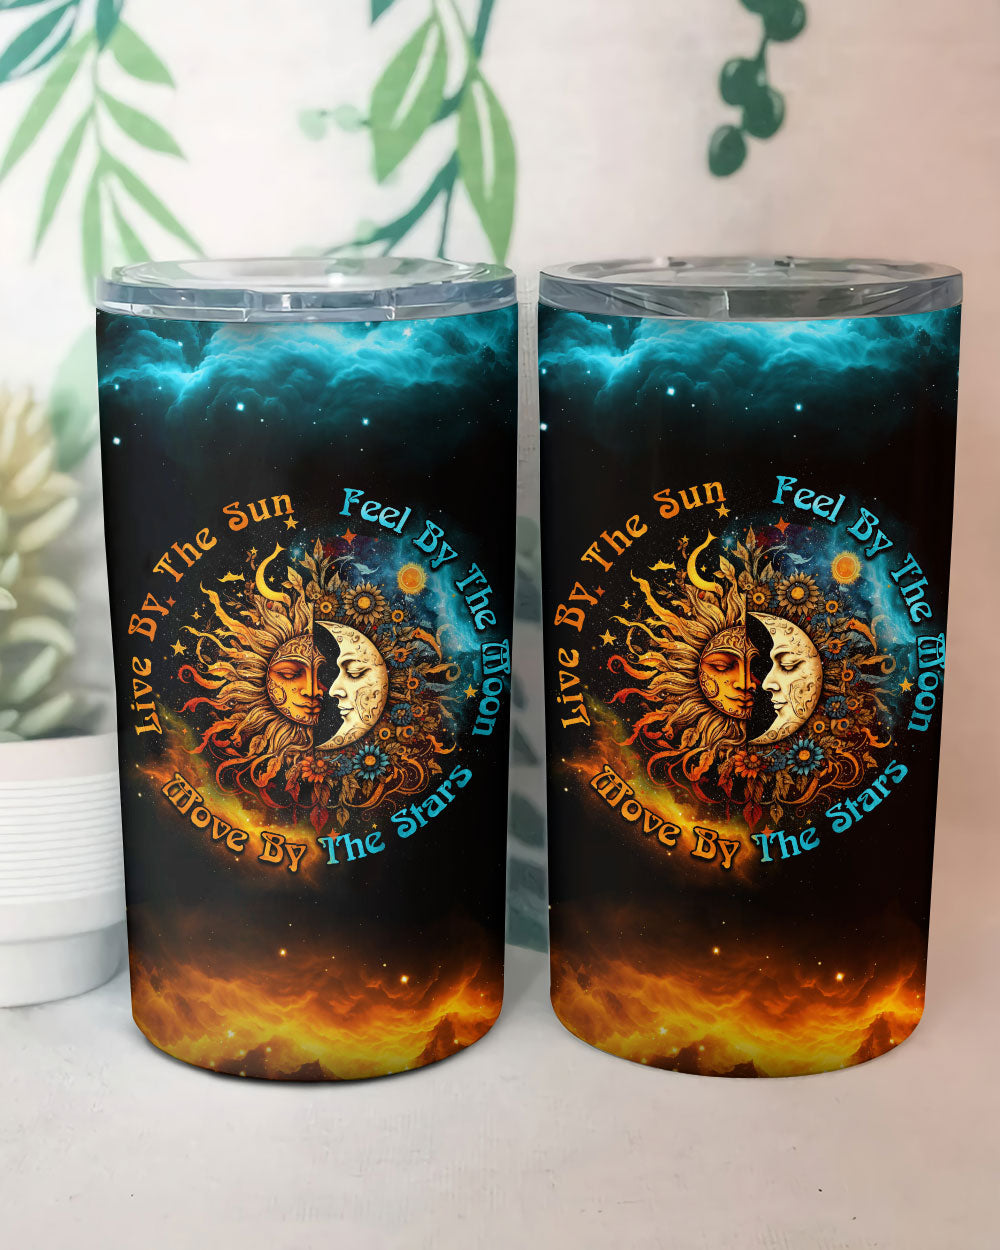 LIVE BY THE SUN TUMBLER - TYTM2702232